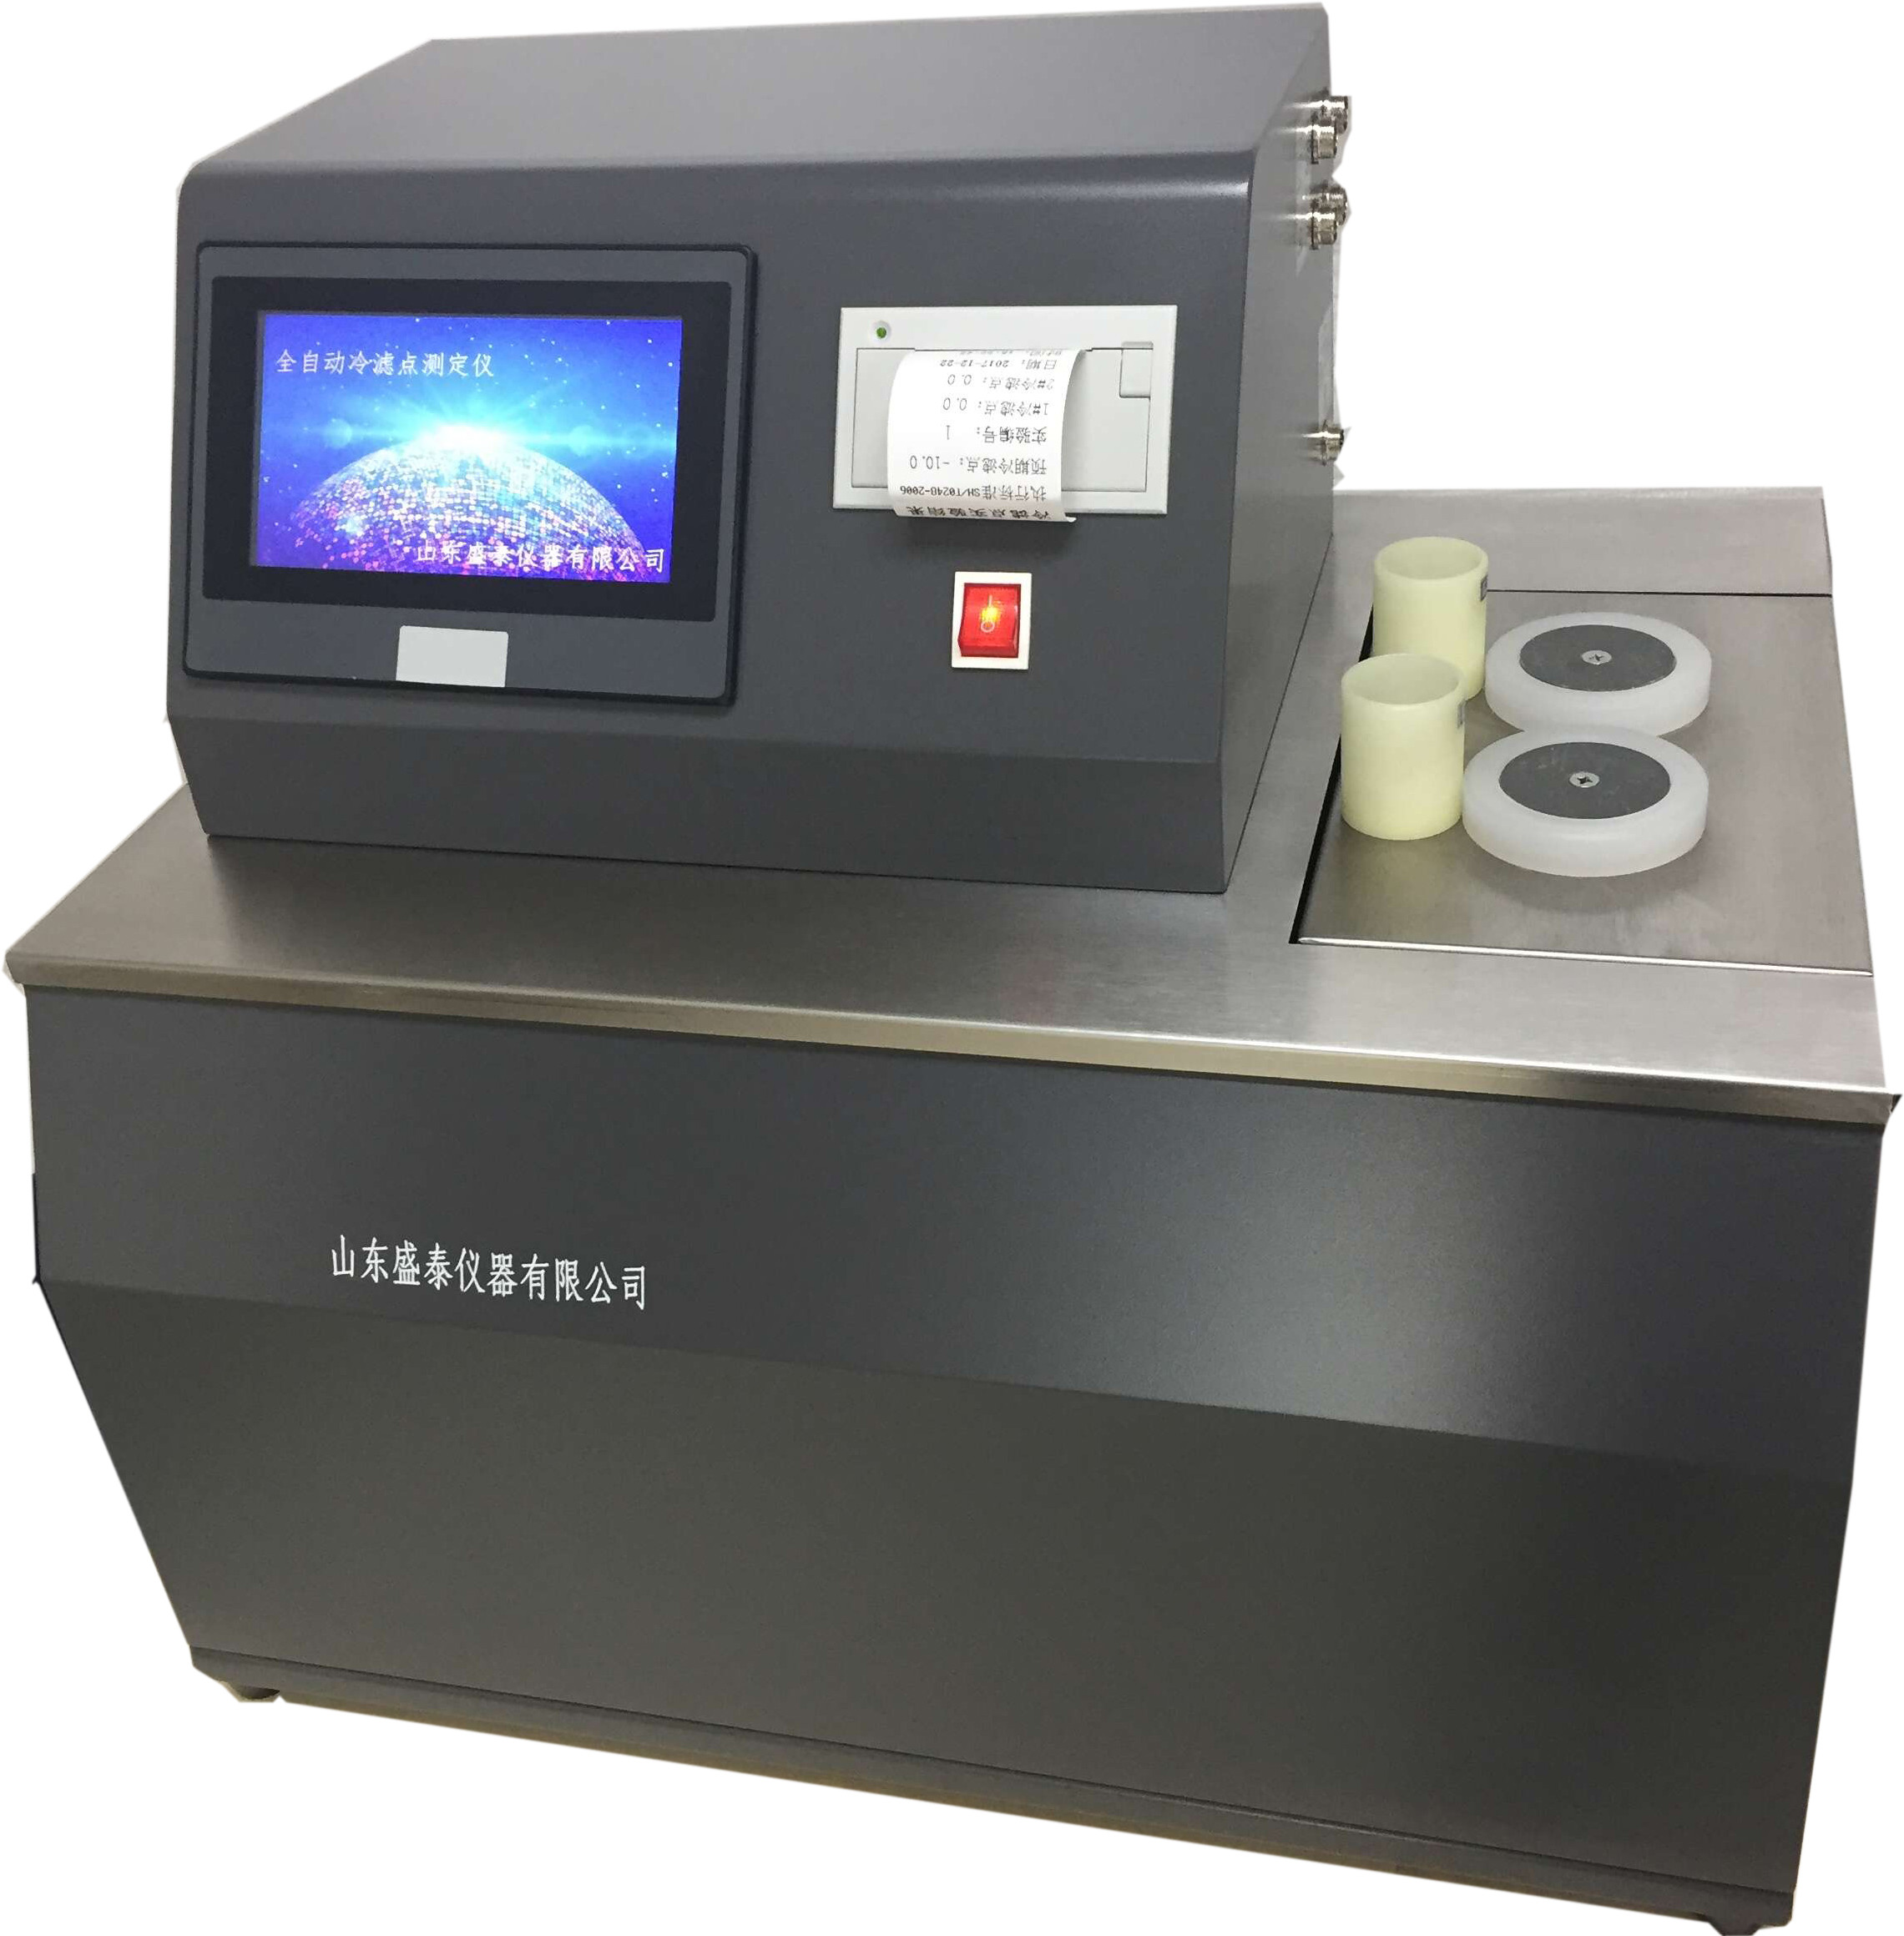  ASTM D97 Automatic Solidifying Point& Pour Point Tester lubricating Oil And Grease Antifreeze tester Manufactures